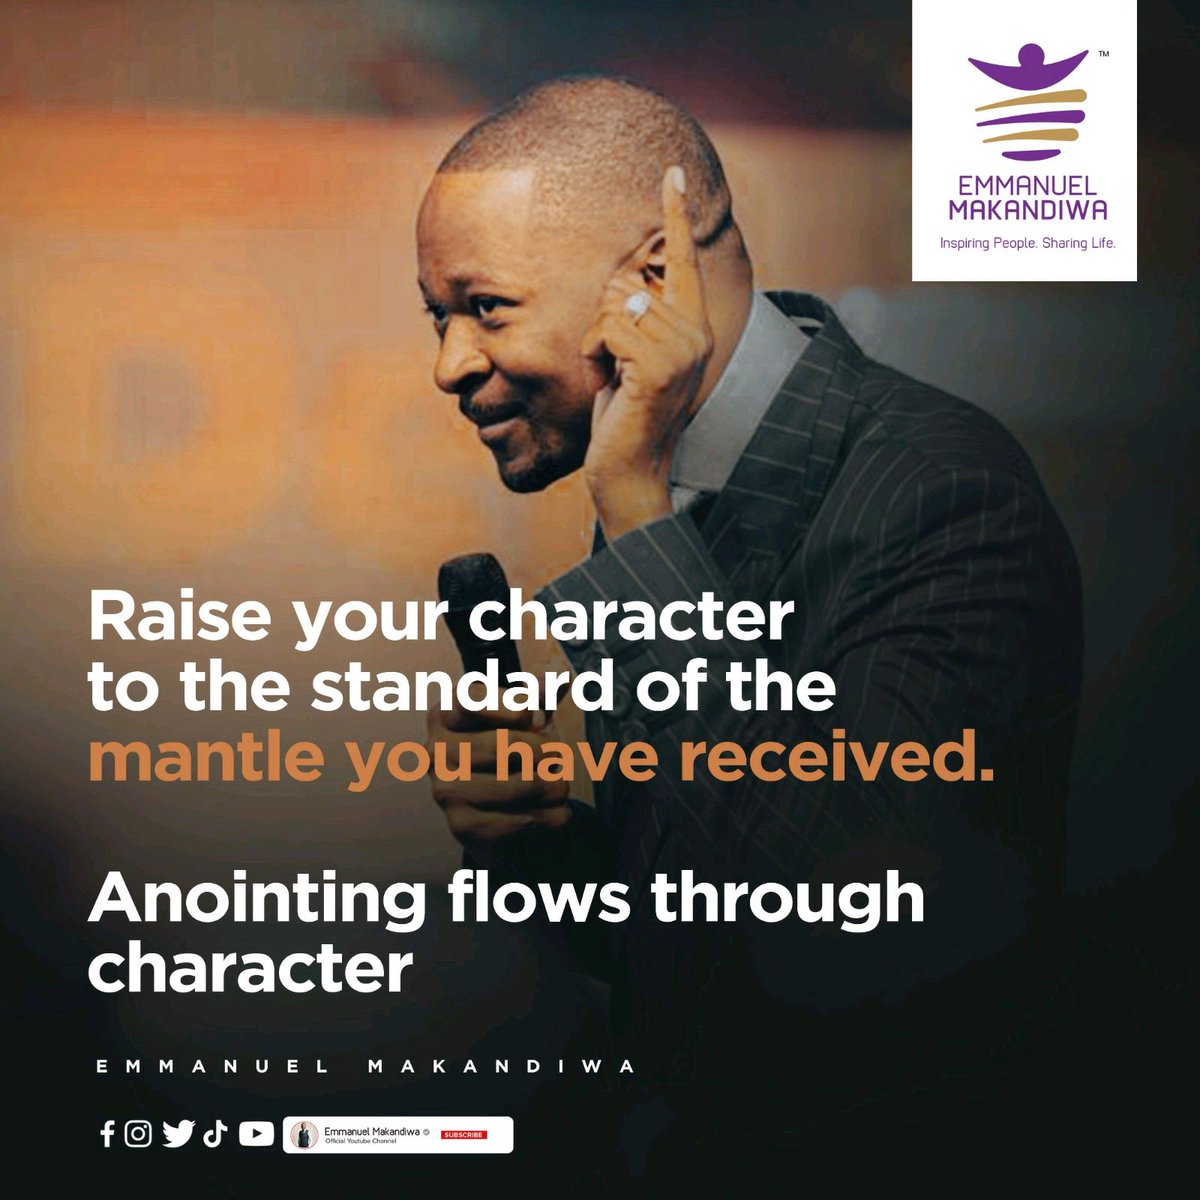 Your character is not defined by your circumstances, but by how you respond to them. Take time for self-work and allow yourself to grow into the best version of yourself.

#character 
#selfwork #emmanuelmakandiwa #ruthemmanuelmakandiwa